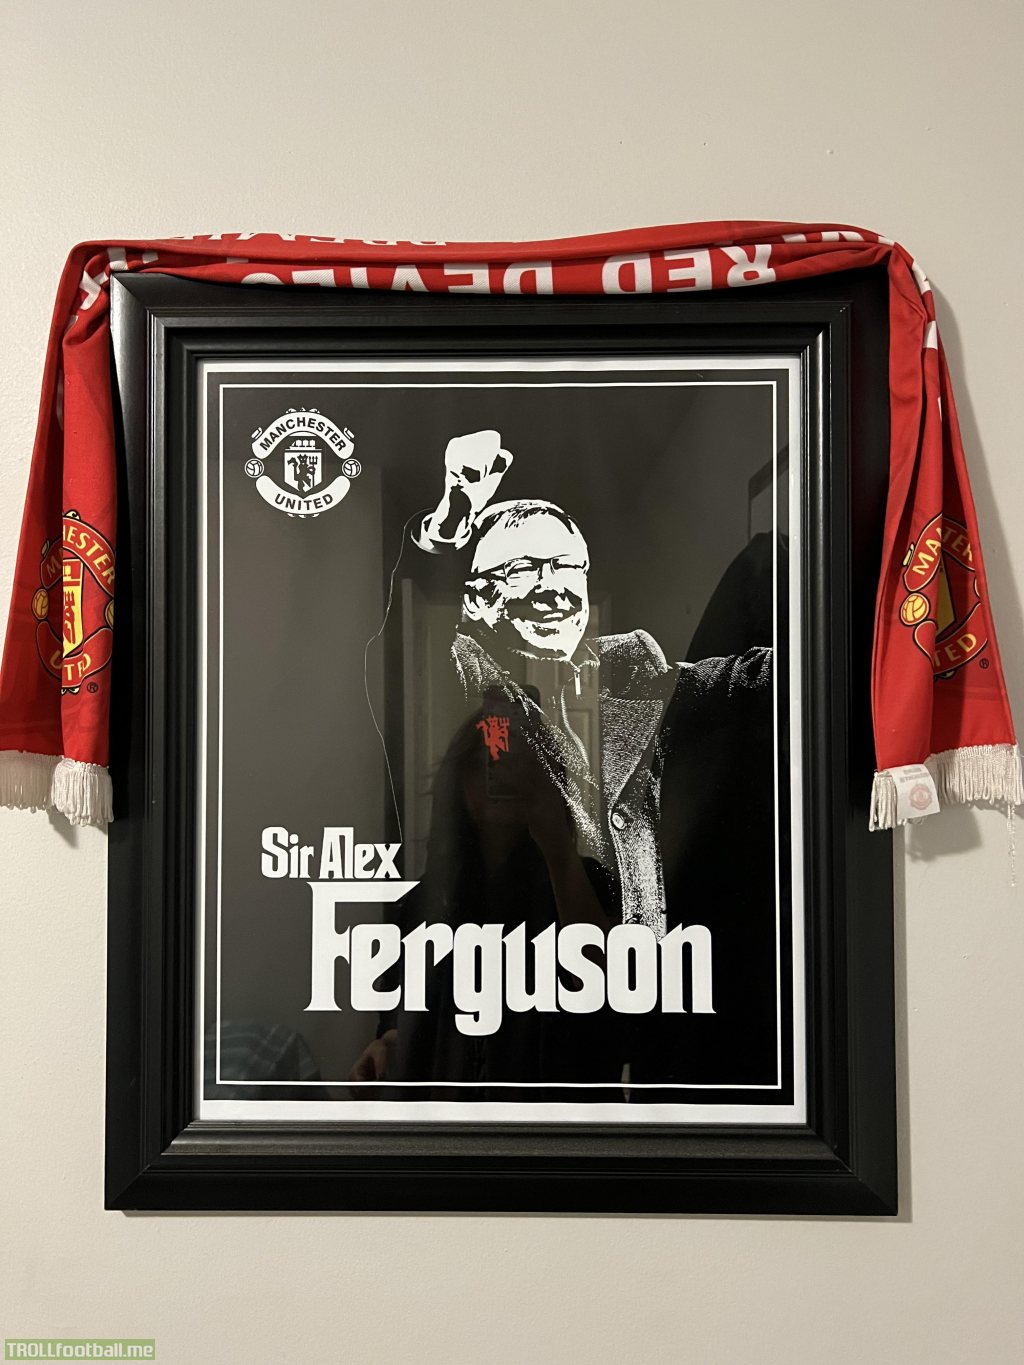 Made this Godfather-themed poster for my boyfriend's birthday, who is the biggest Alex Ferguson fan. Thought I'd share😊